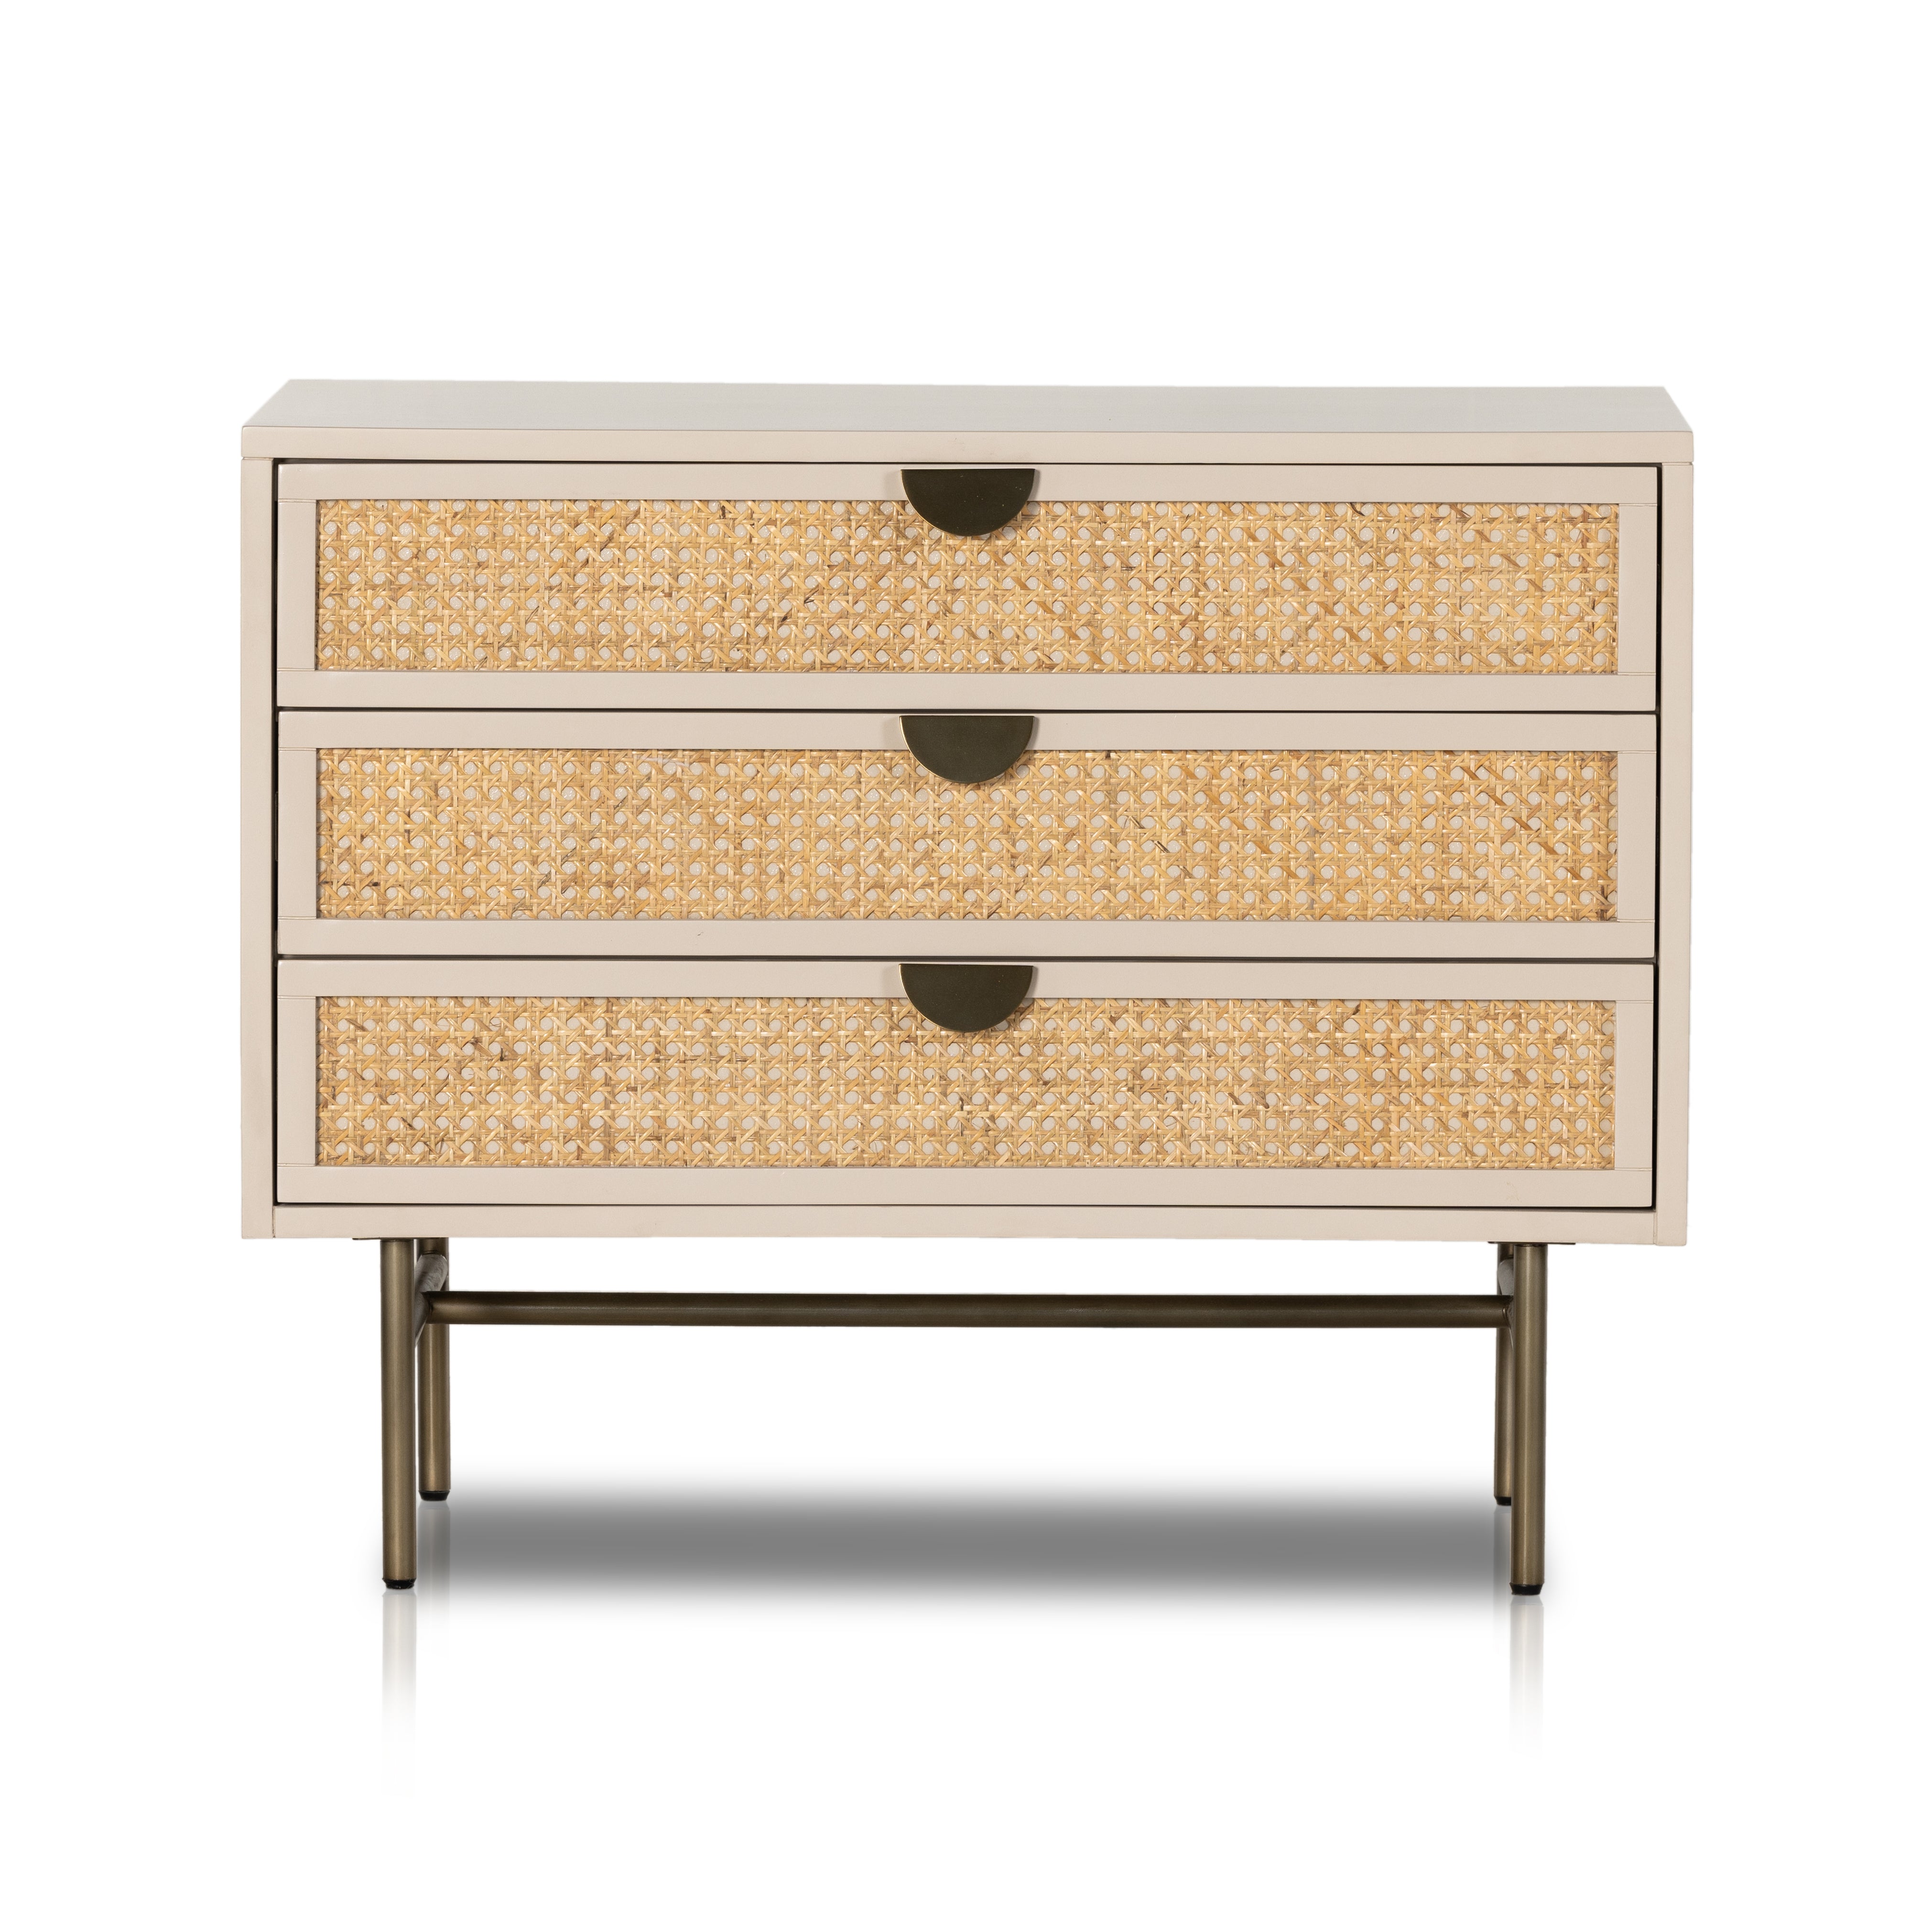 Bring a light, textural look to bedside storage. A lacquered three-drawer nightstand features woven cane panels and half-moon hardware finished in an aged brass. Amethyst Home provides interior design, new construction, custom furniture, and area rugs in the Washington metro area.